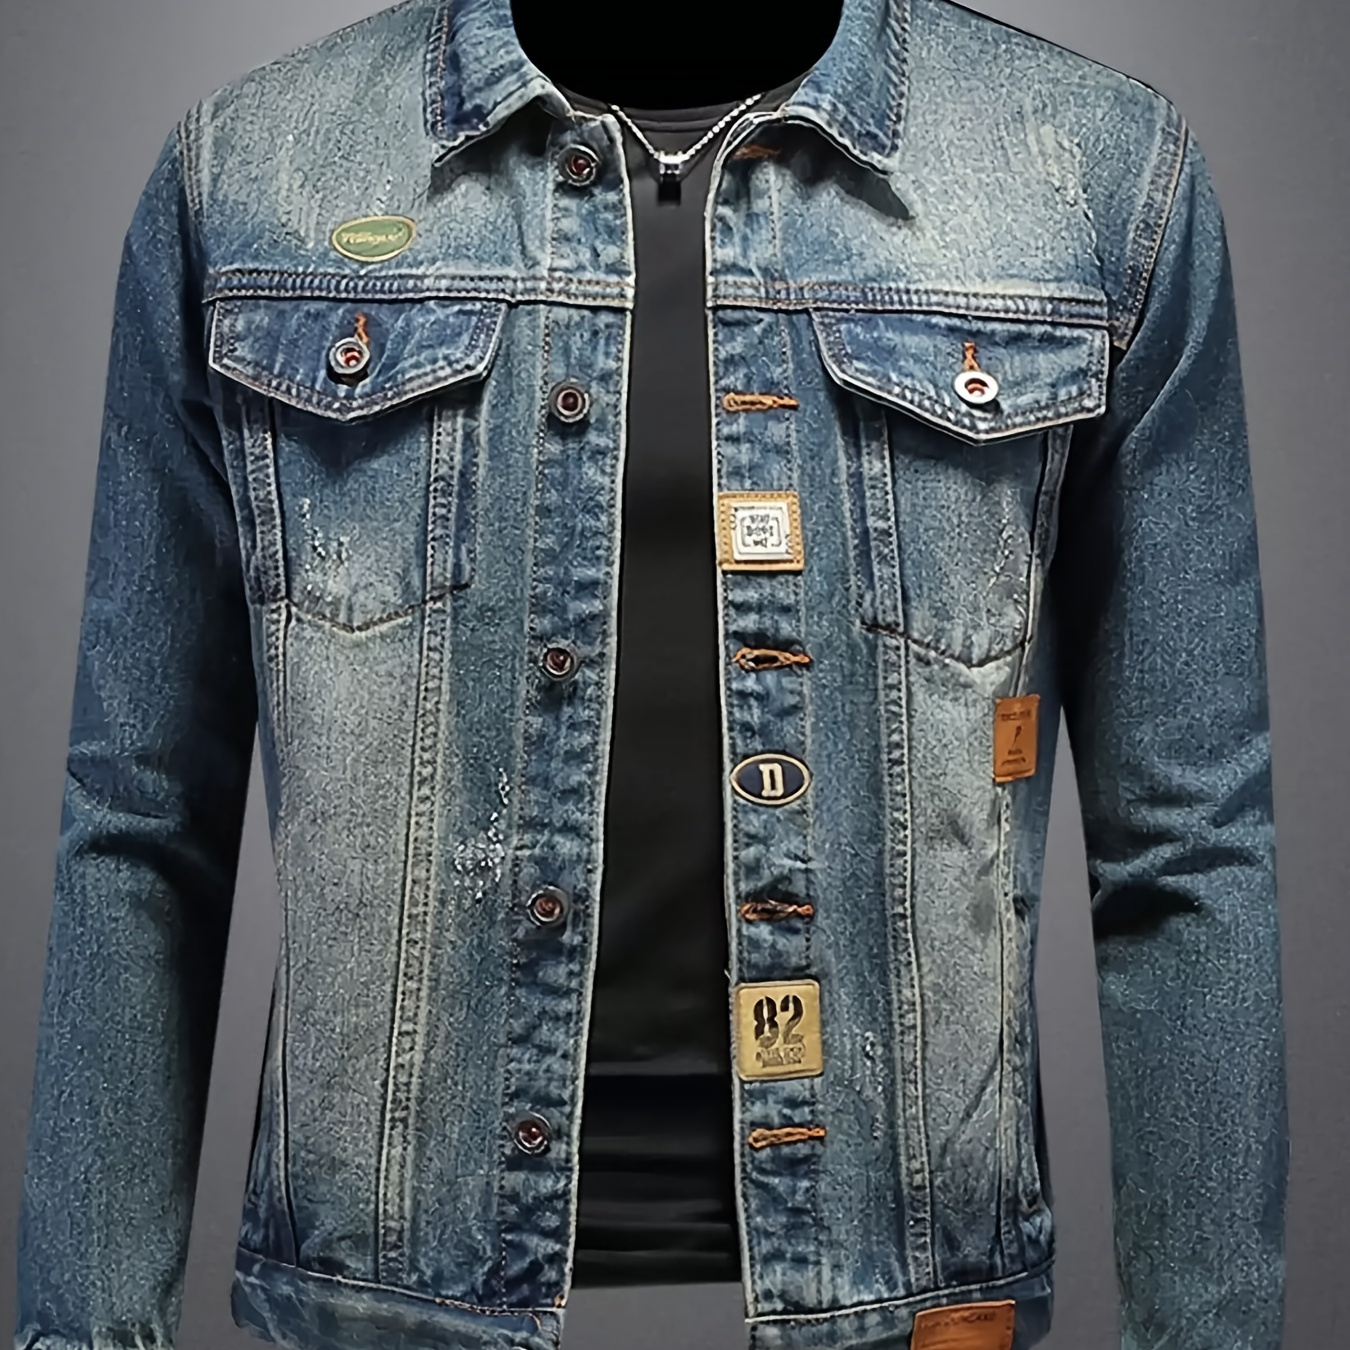 

Men's Letters Graphic Print Denim Jacket With Multi Pockets, Casual Lapel Button Up Cotton Blend Long Sleeve Outwear For Outdoor